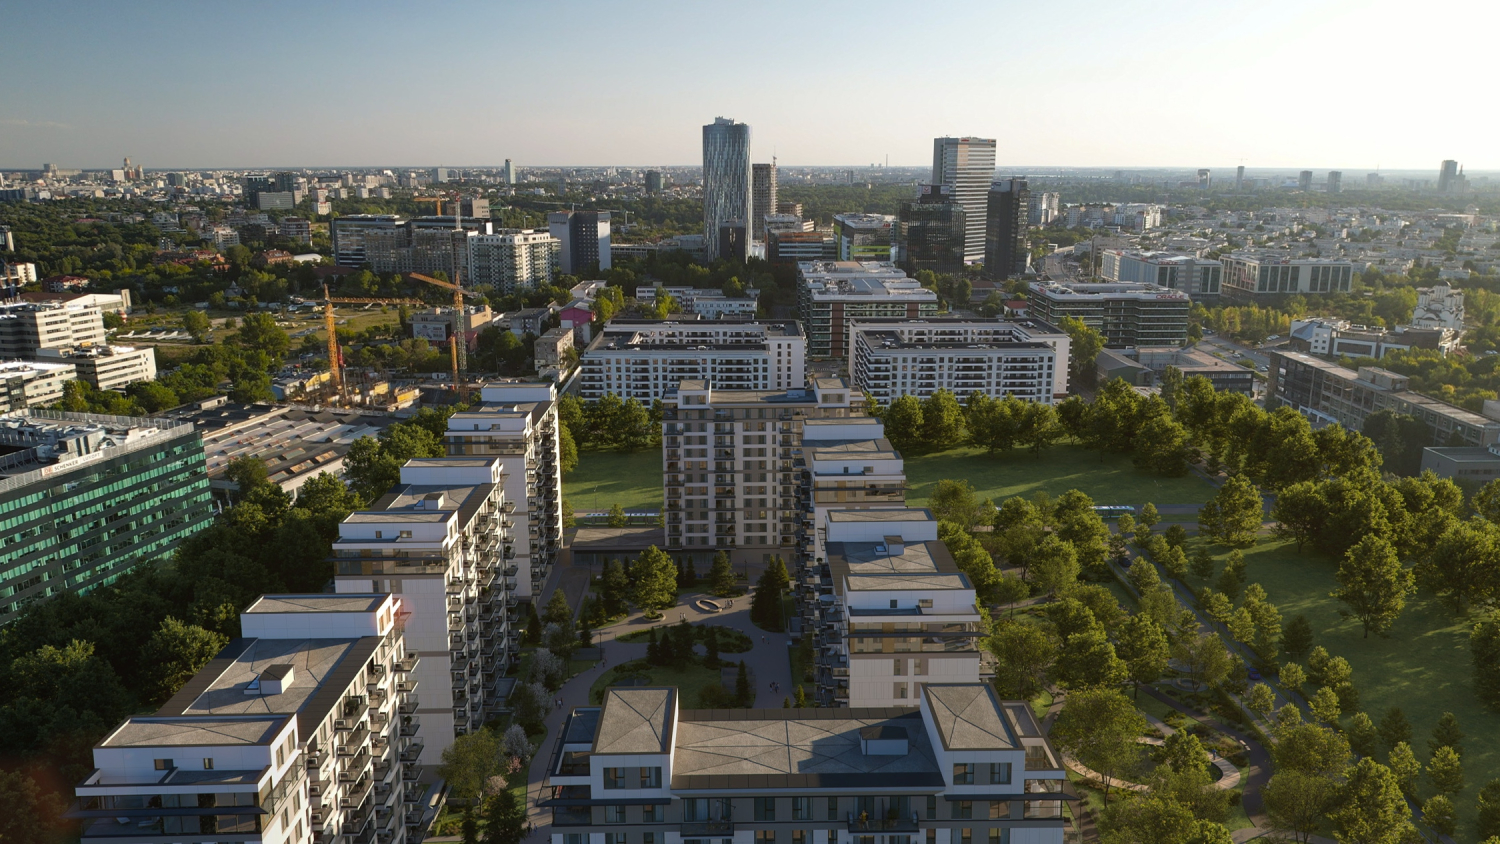 Nusco Imobiliara sells 30% of homes in Bucharest project